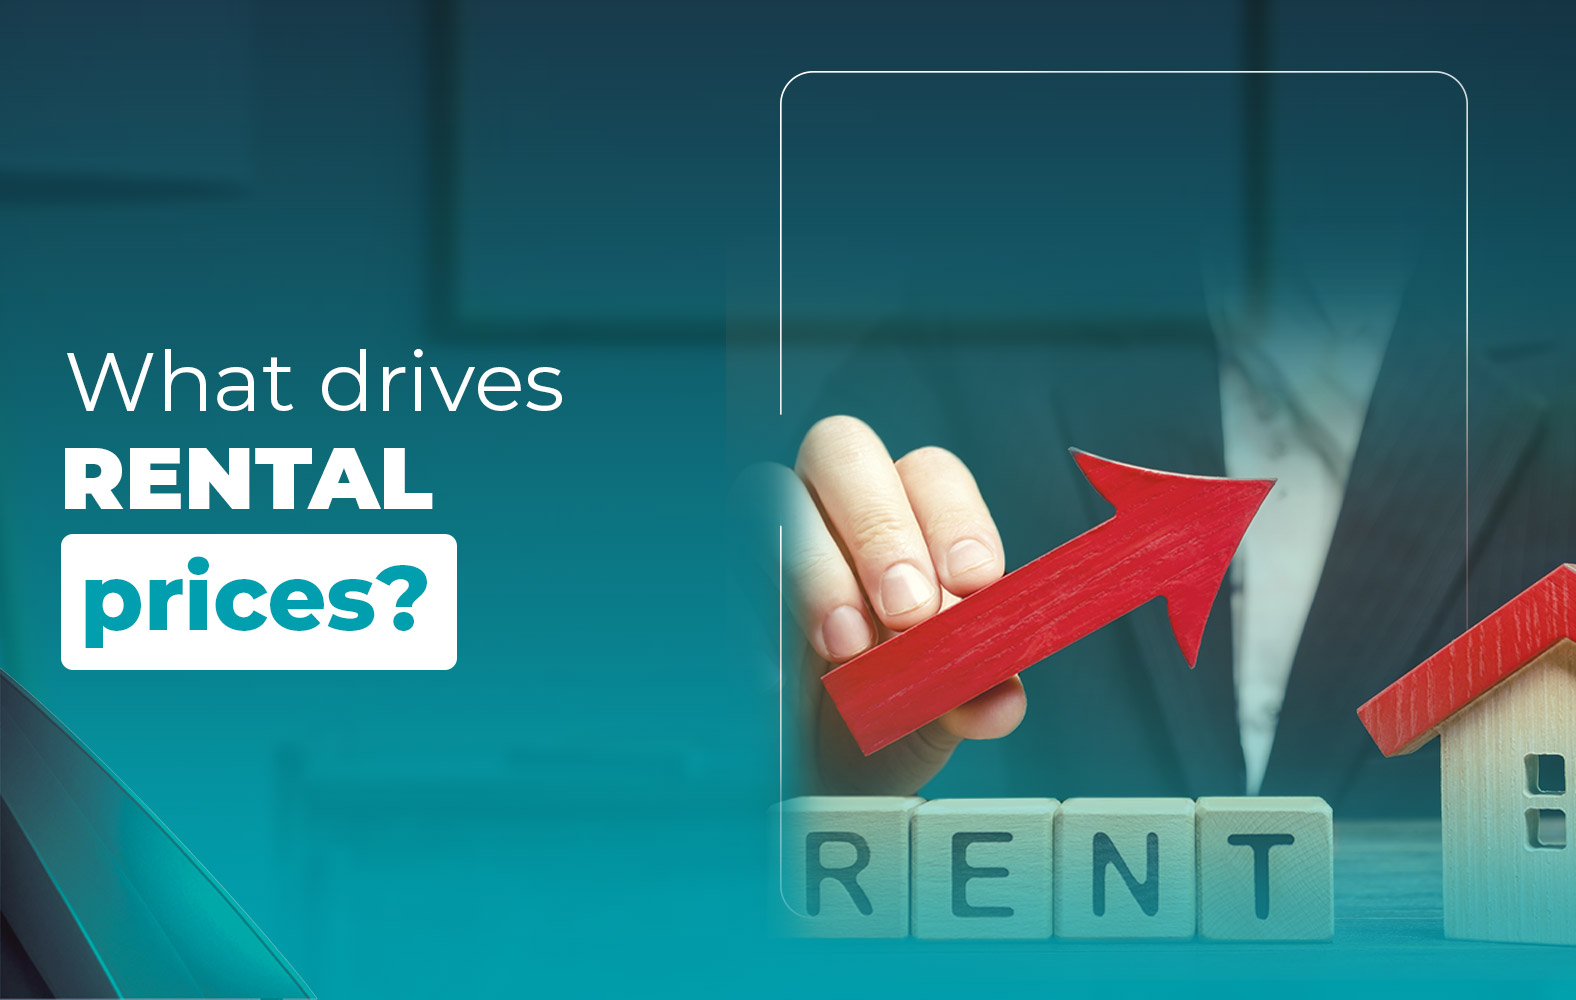 Today we show you what drives rental prices